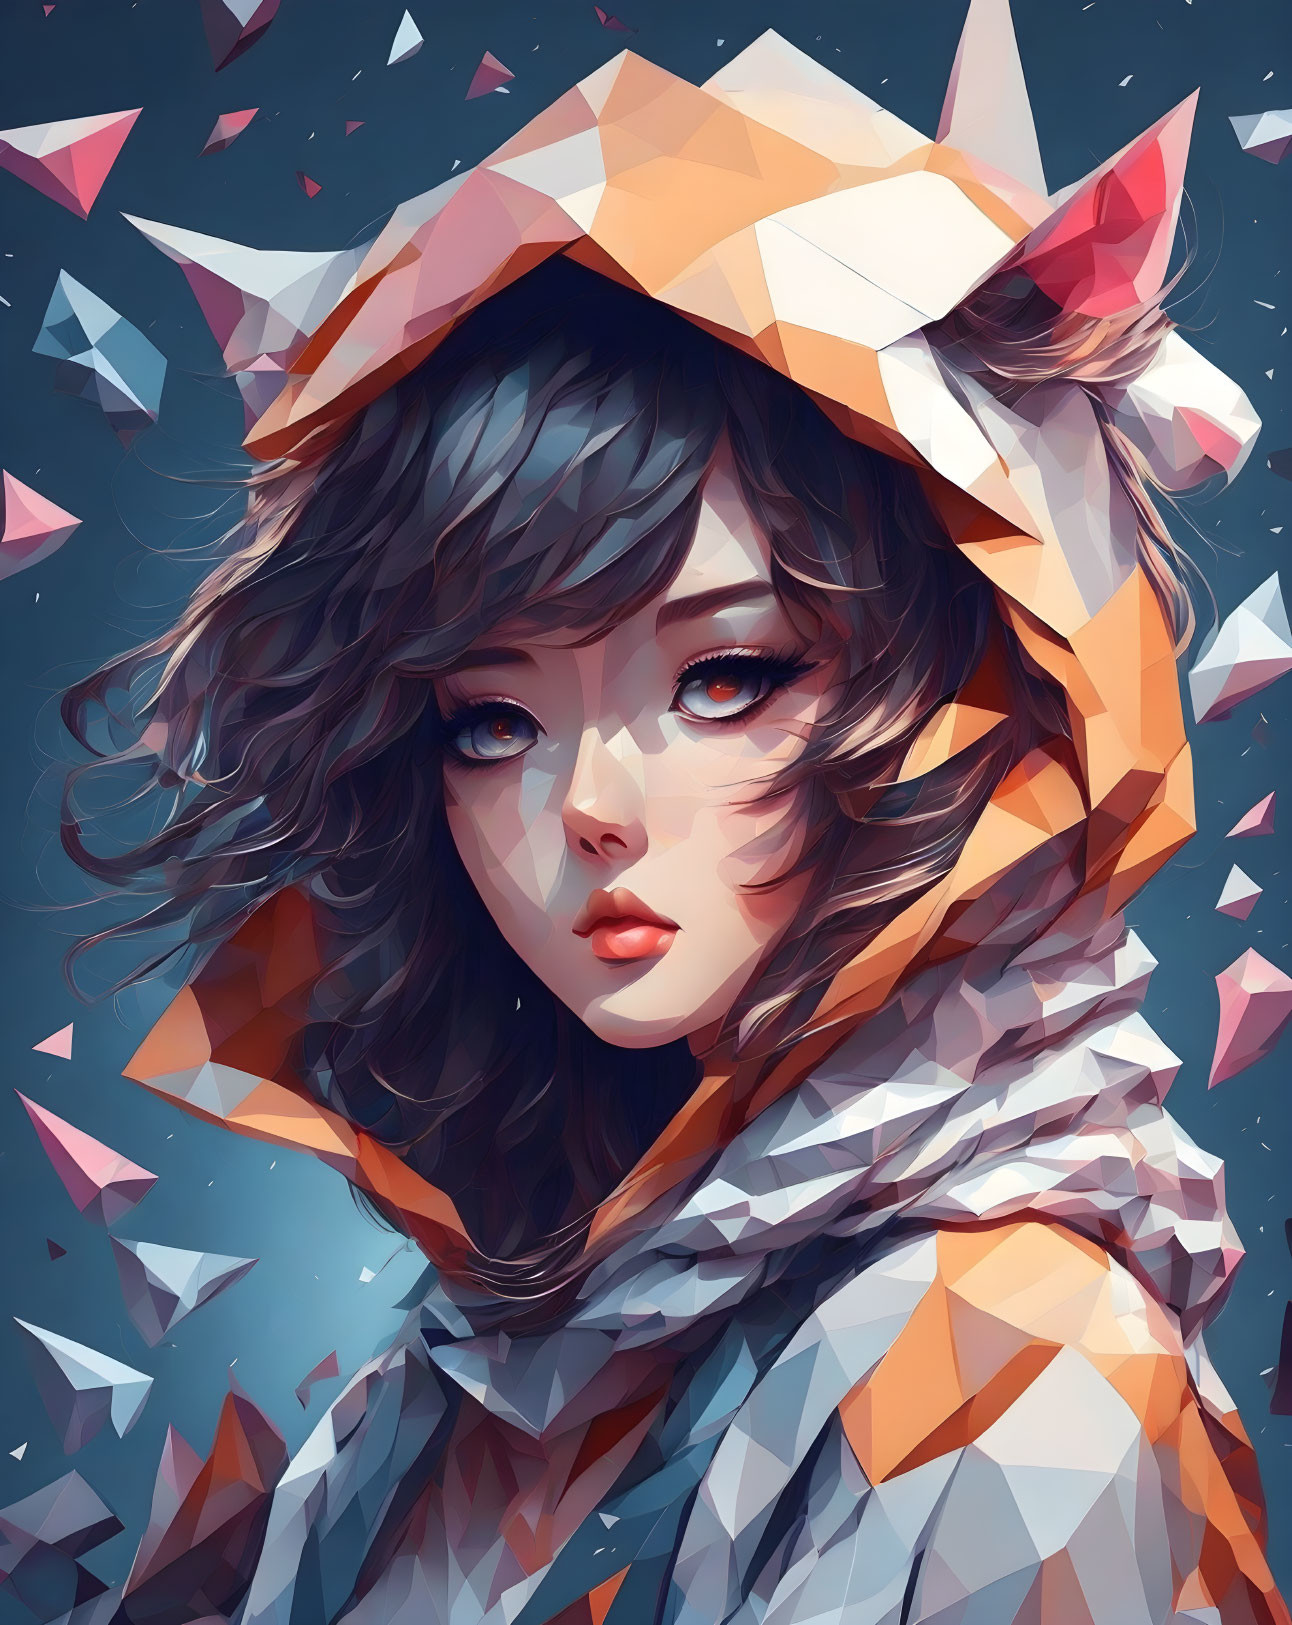 Illustrated girl with large eyes in fox hood on starry background